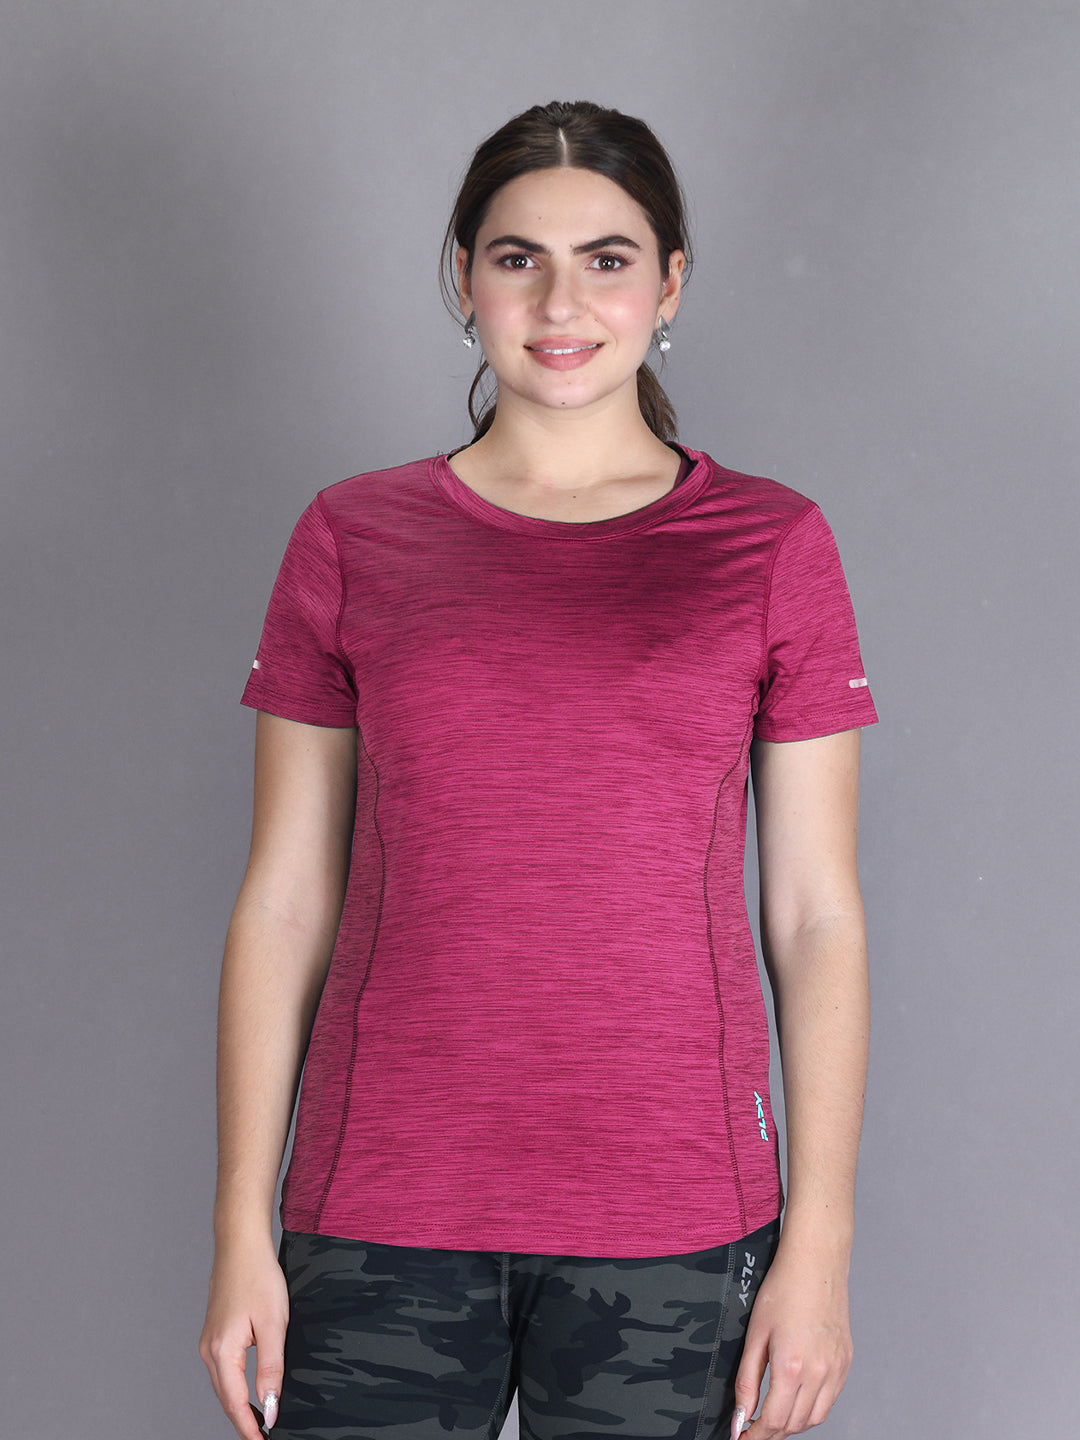 Maroon Dri-Fit Play Series Active Wear Top #AT022